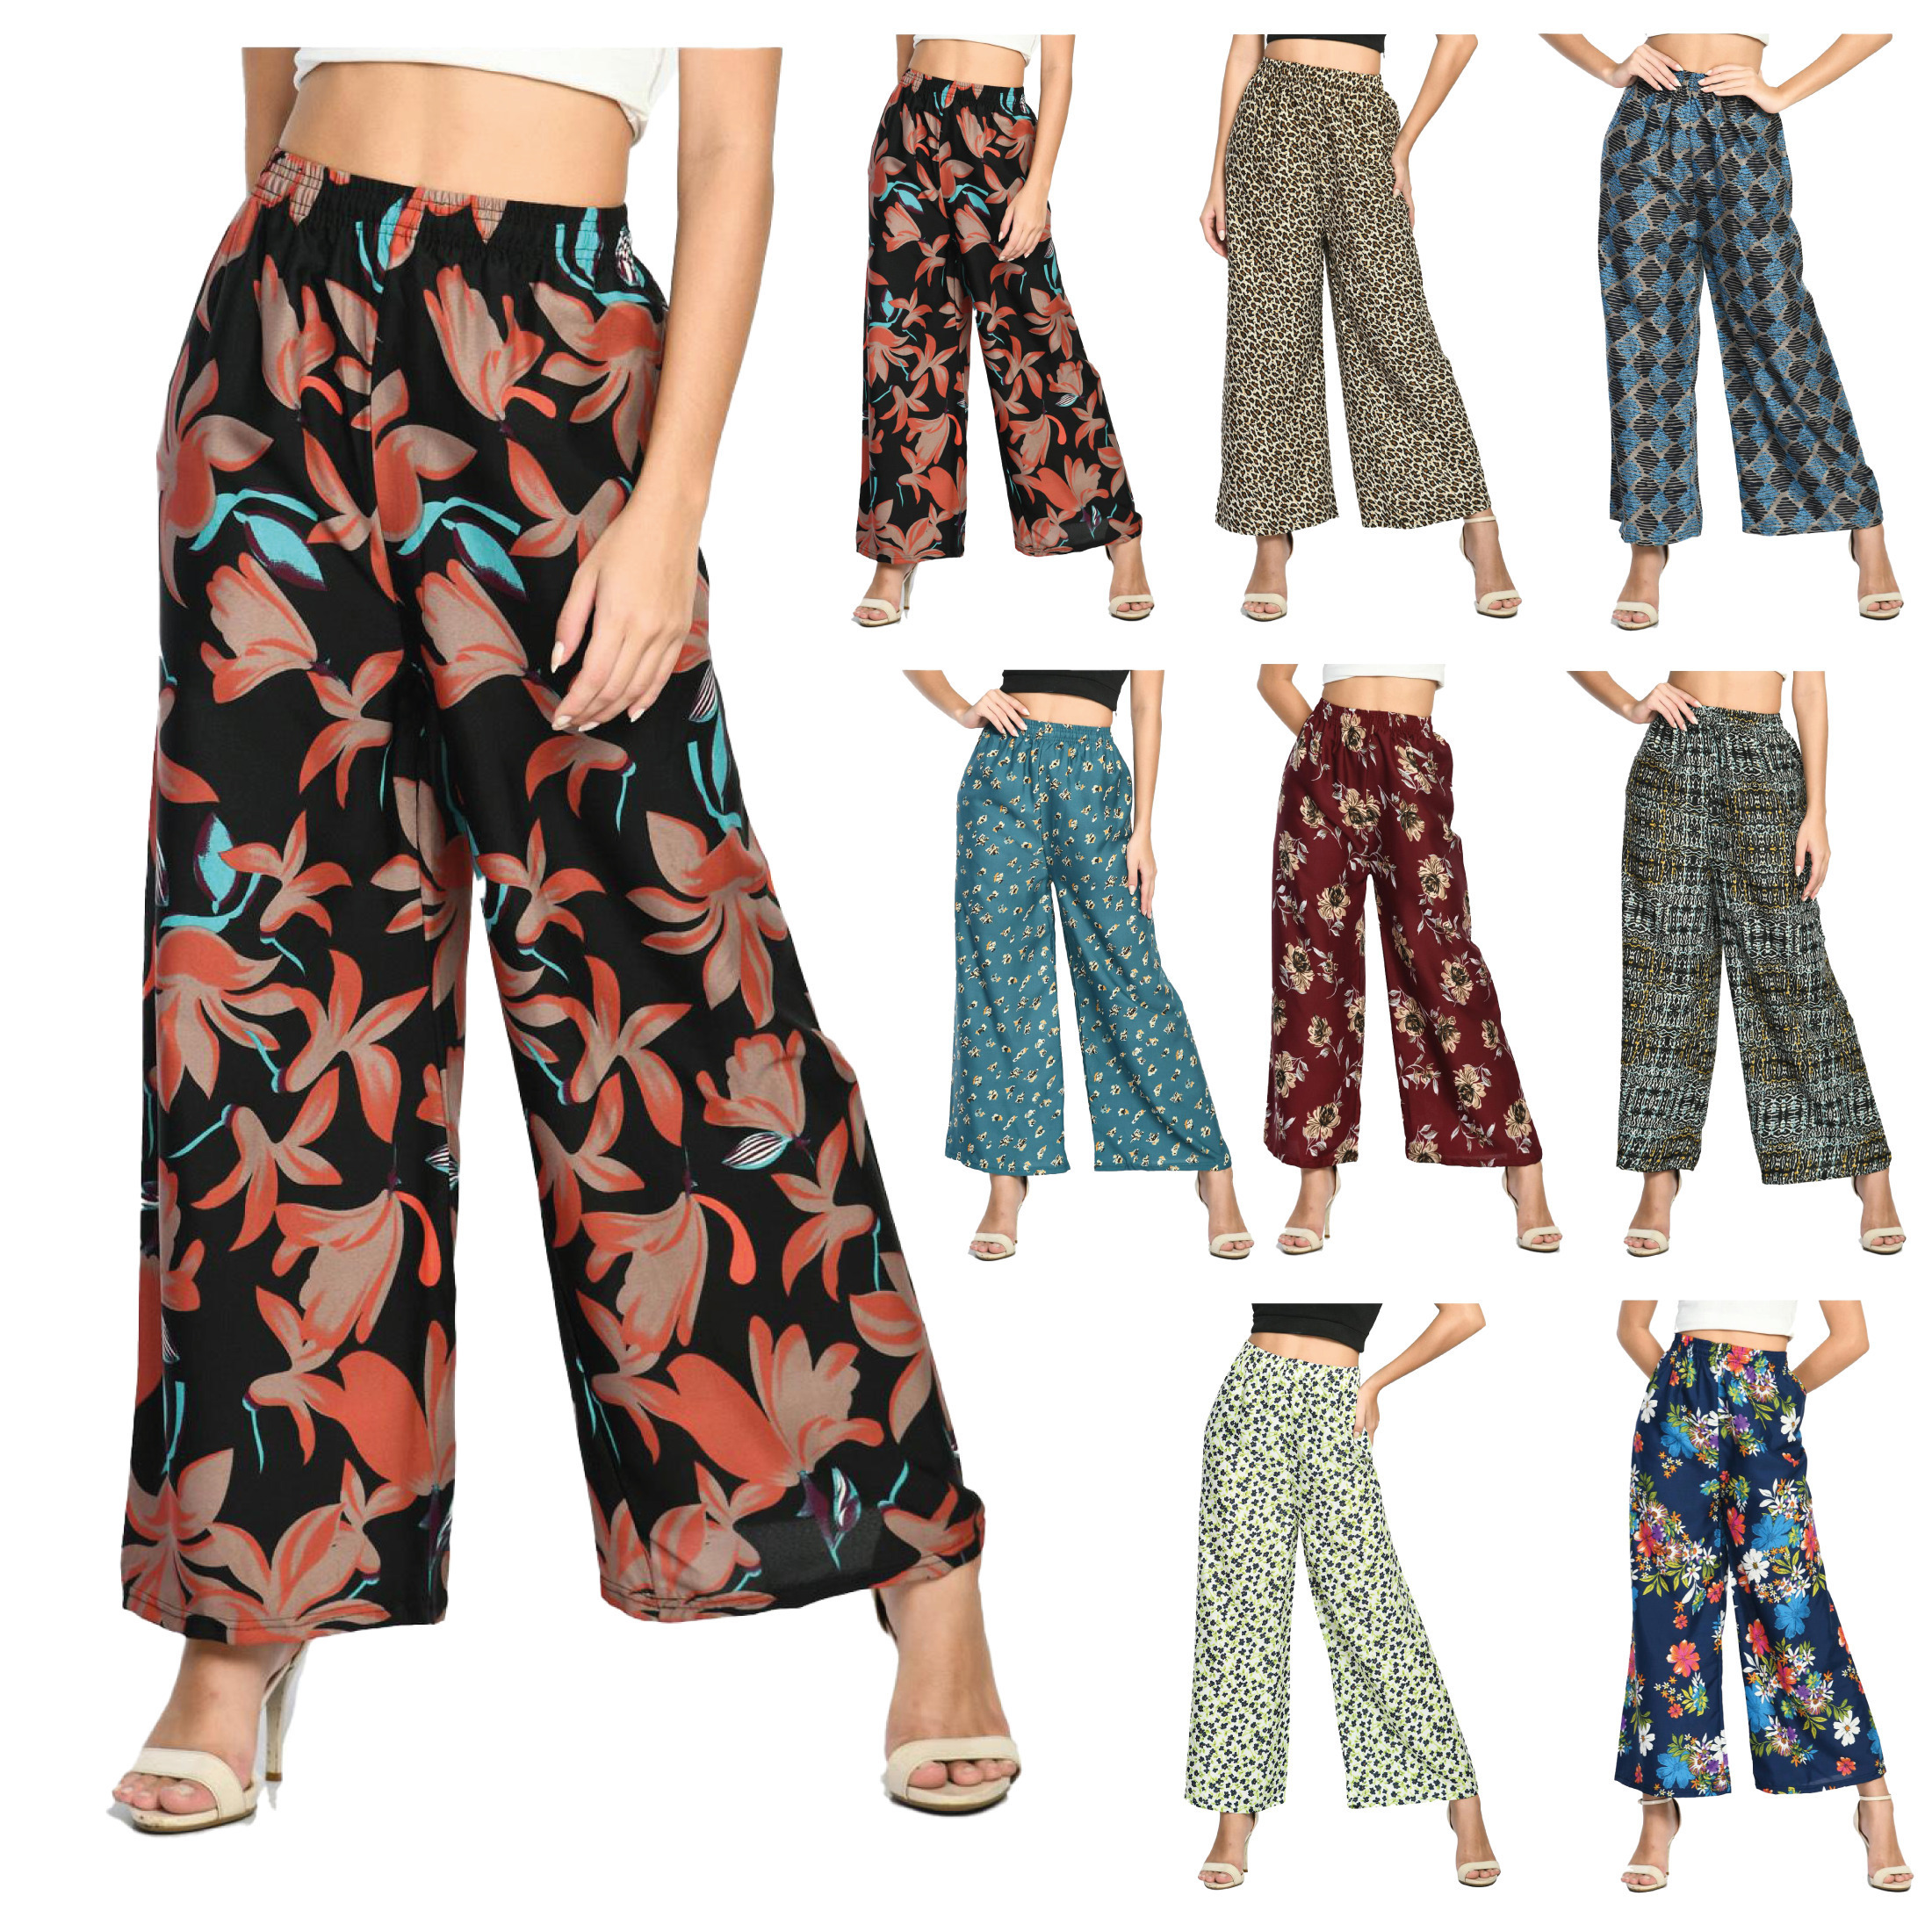 2-Pack: Ladies Soft Cotton Blended Loose Fit Wide Leg Comfort Printed Pants - Small